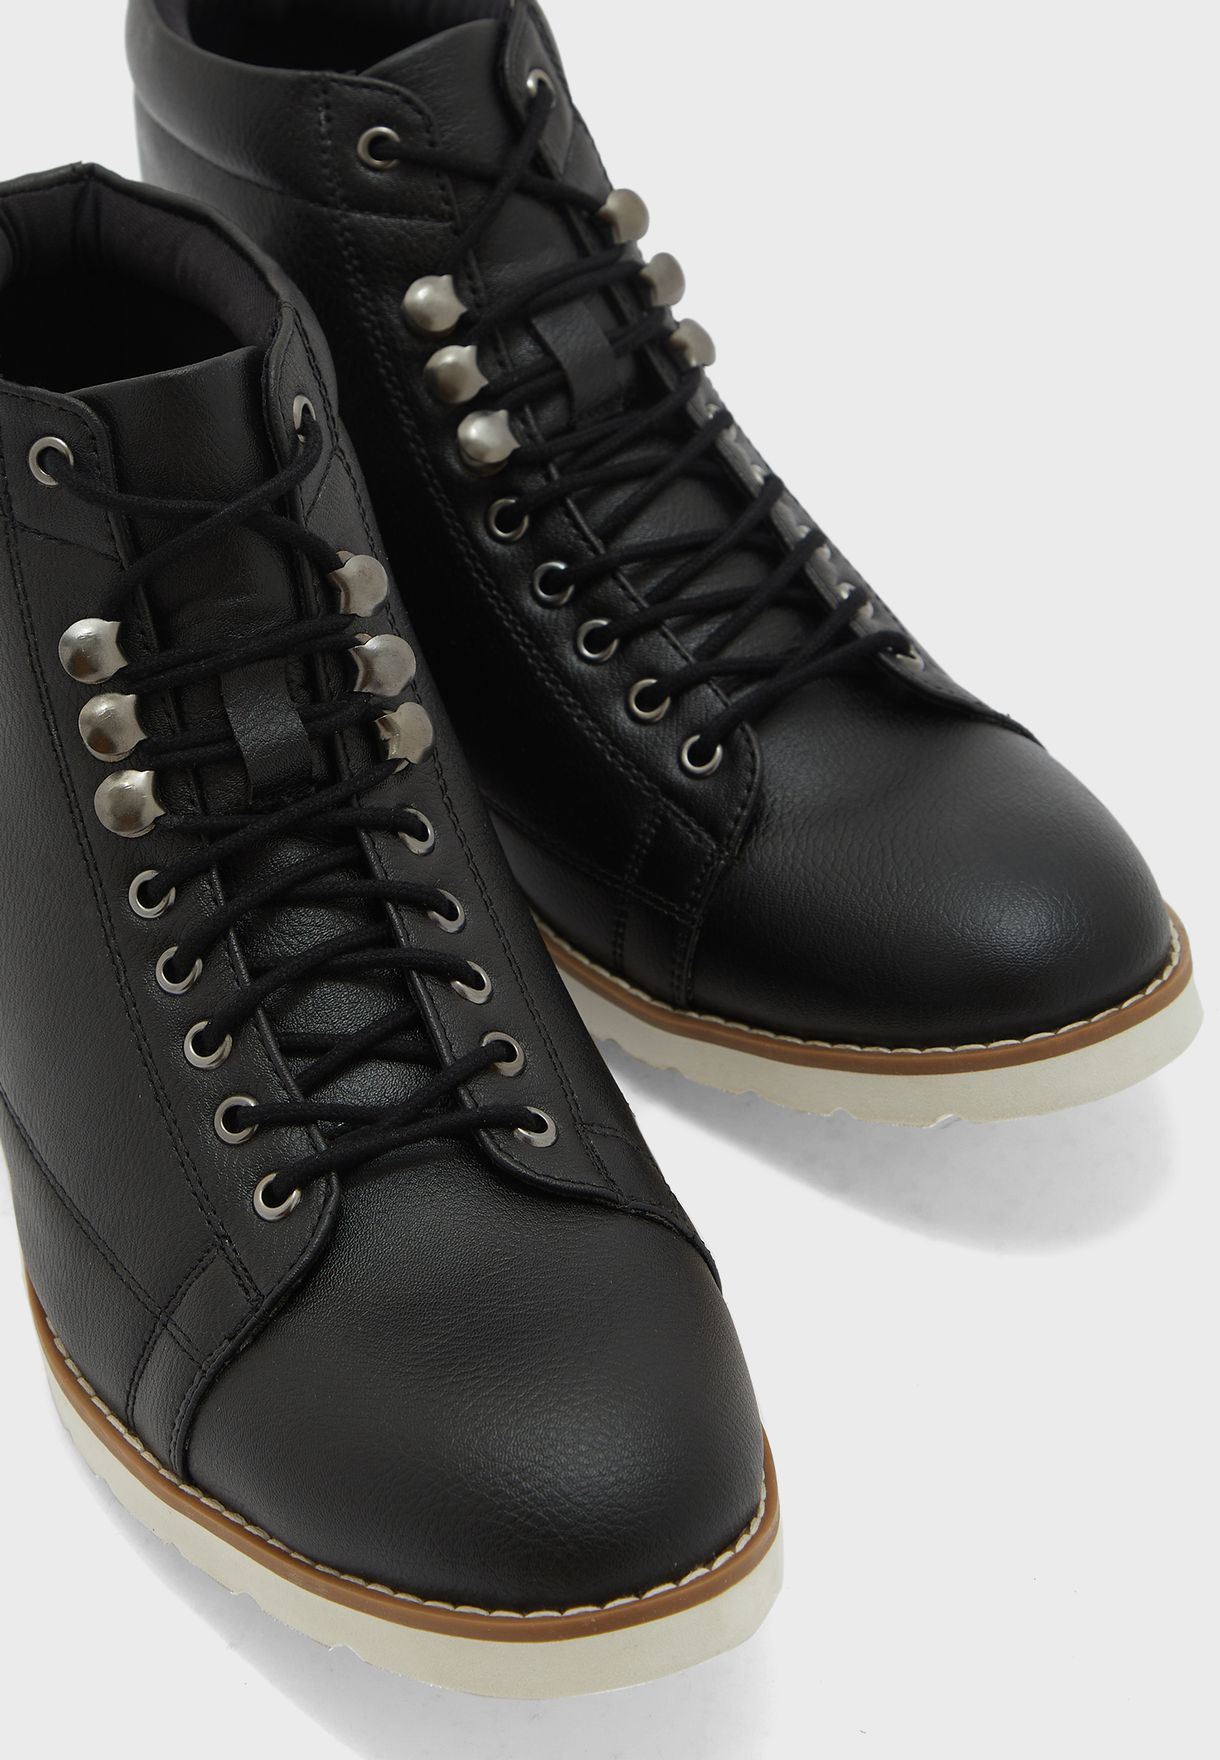 Welted Lace Up Boots